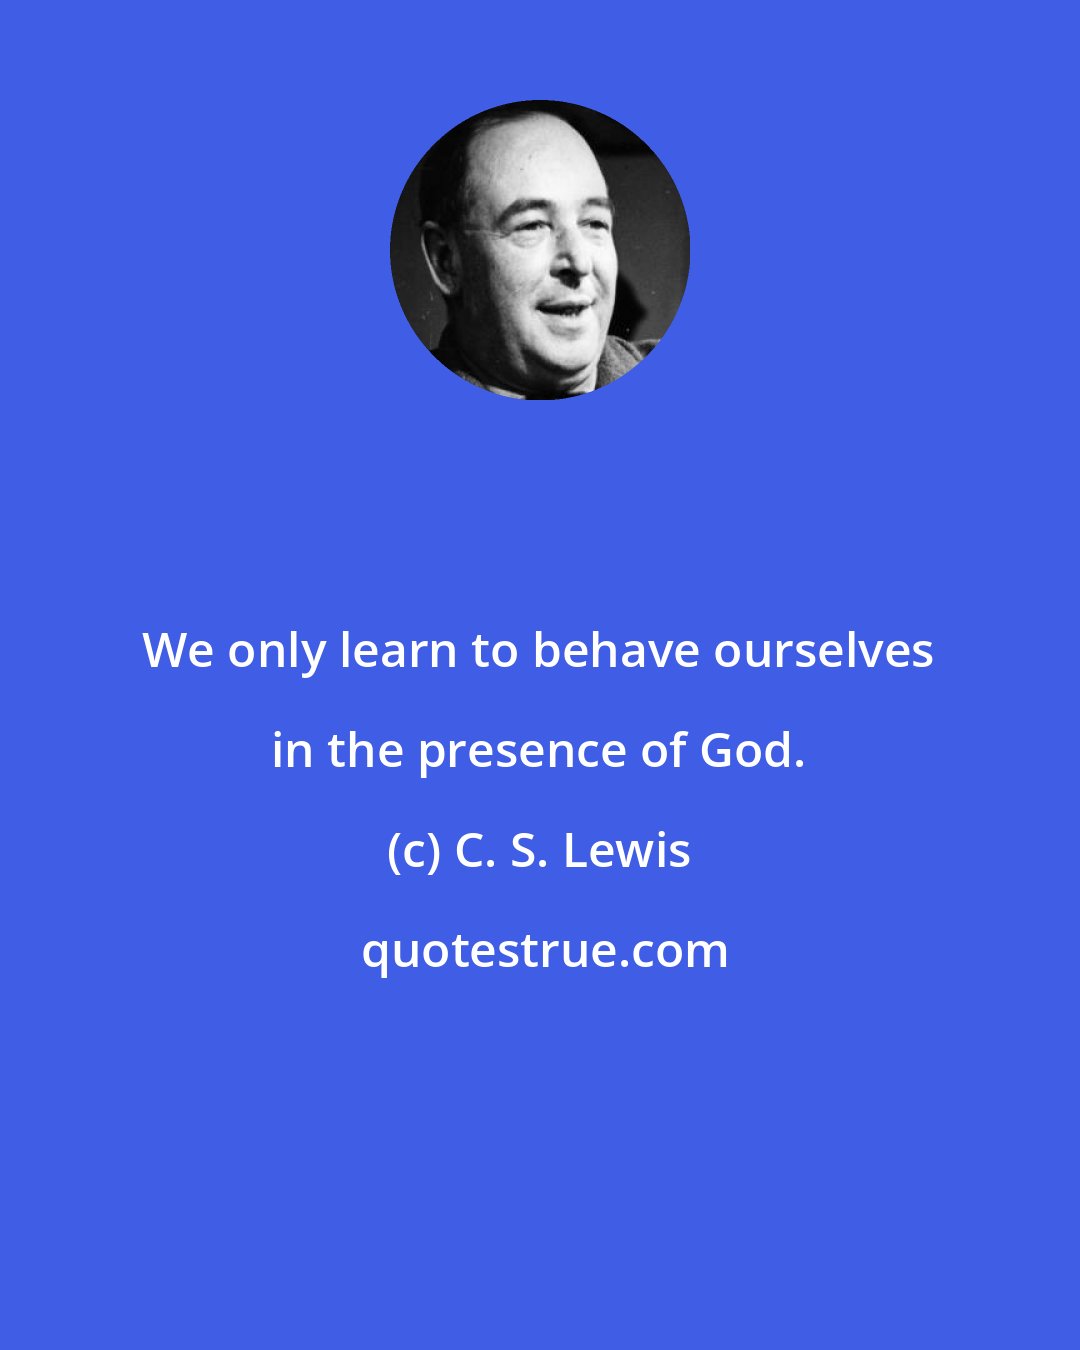 C. S. Lewis: We only learn to behave ourselves in the presence of God.